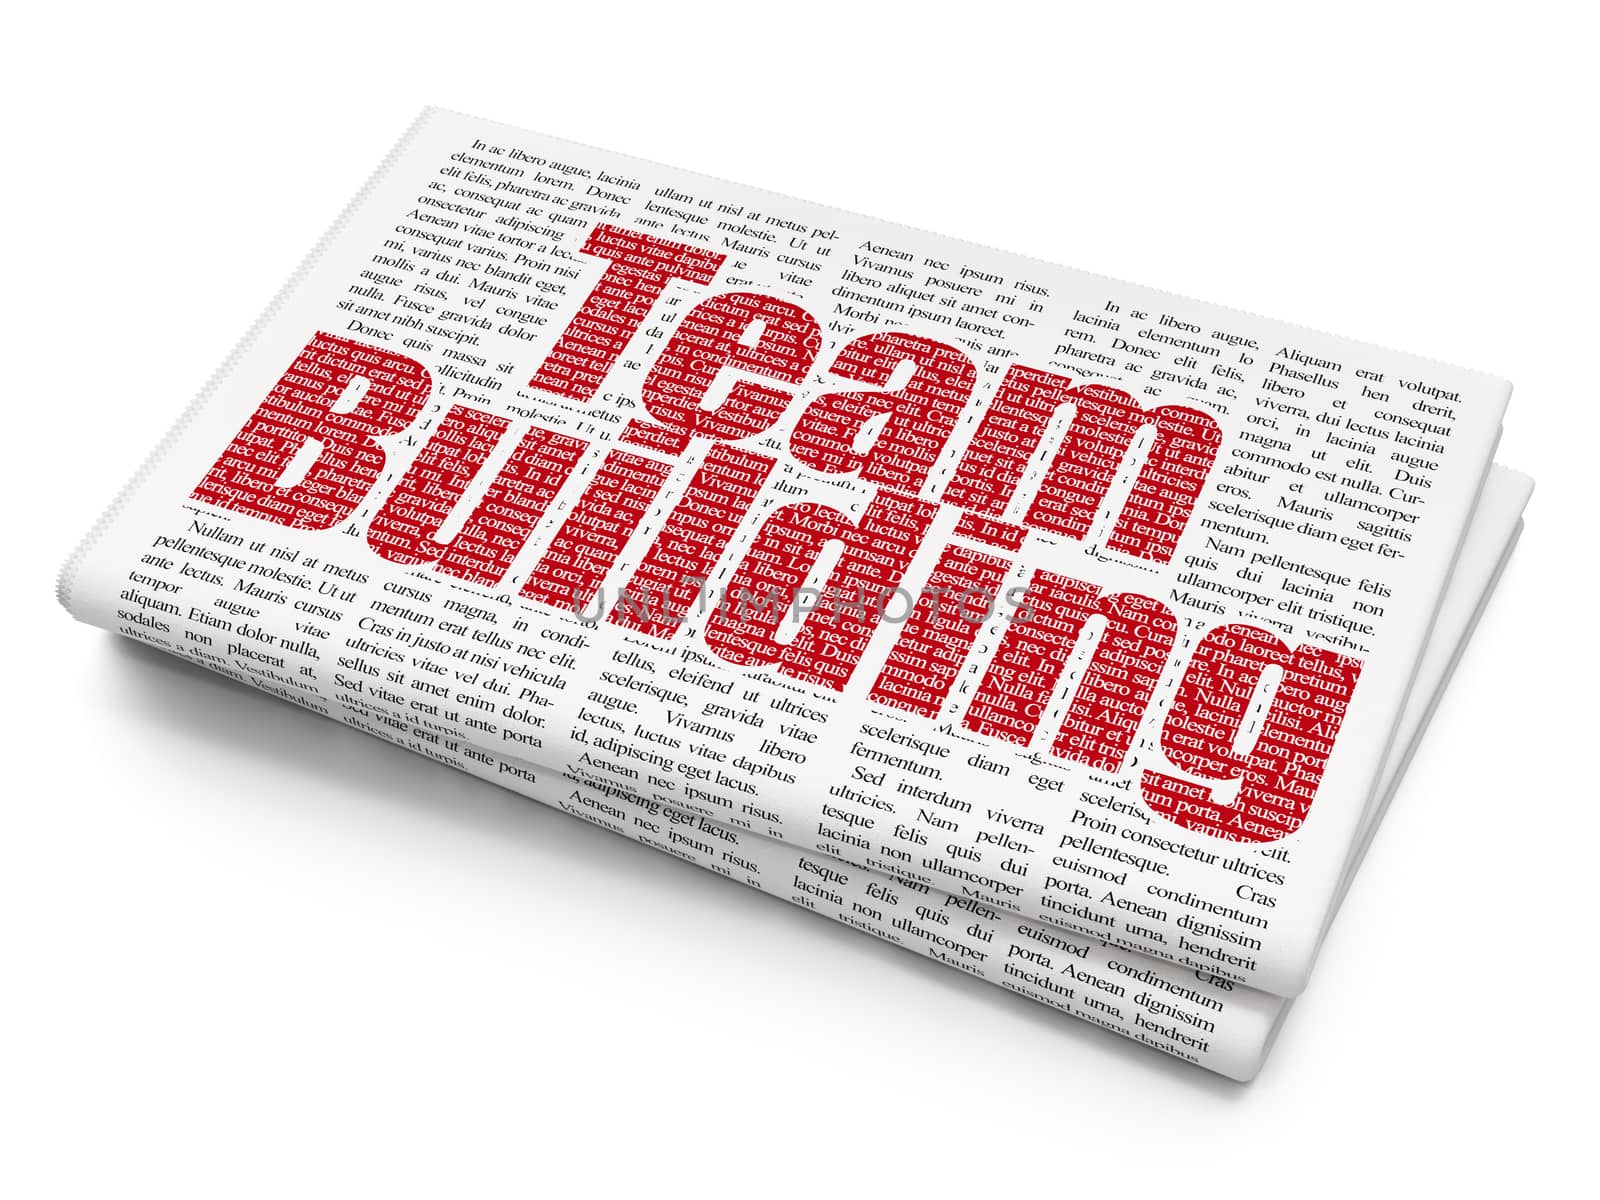 Business concept: Pixelated red text Team Building on Newspaper background